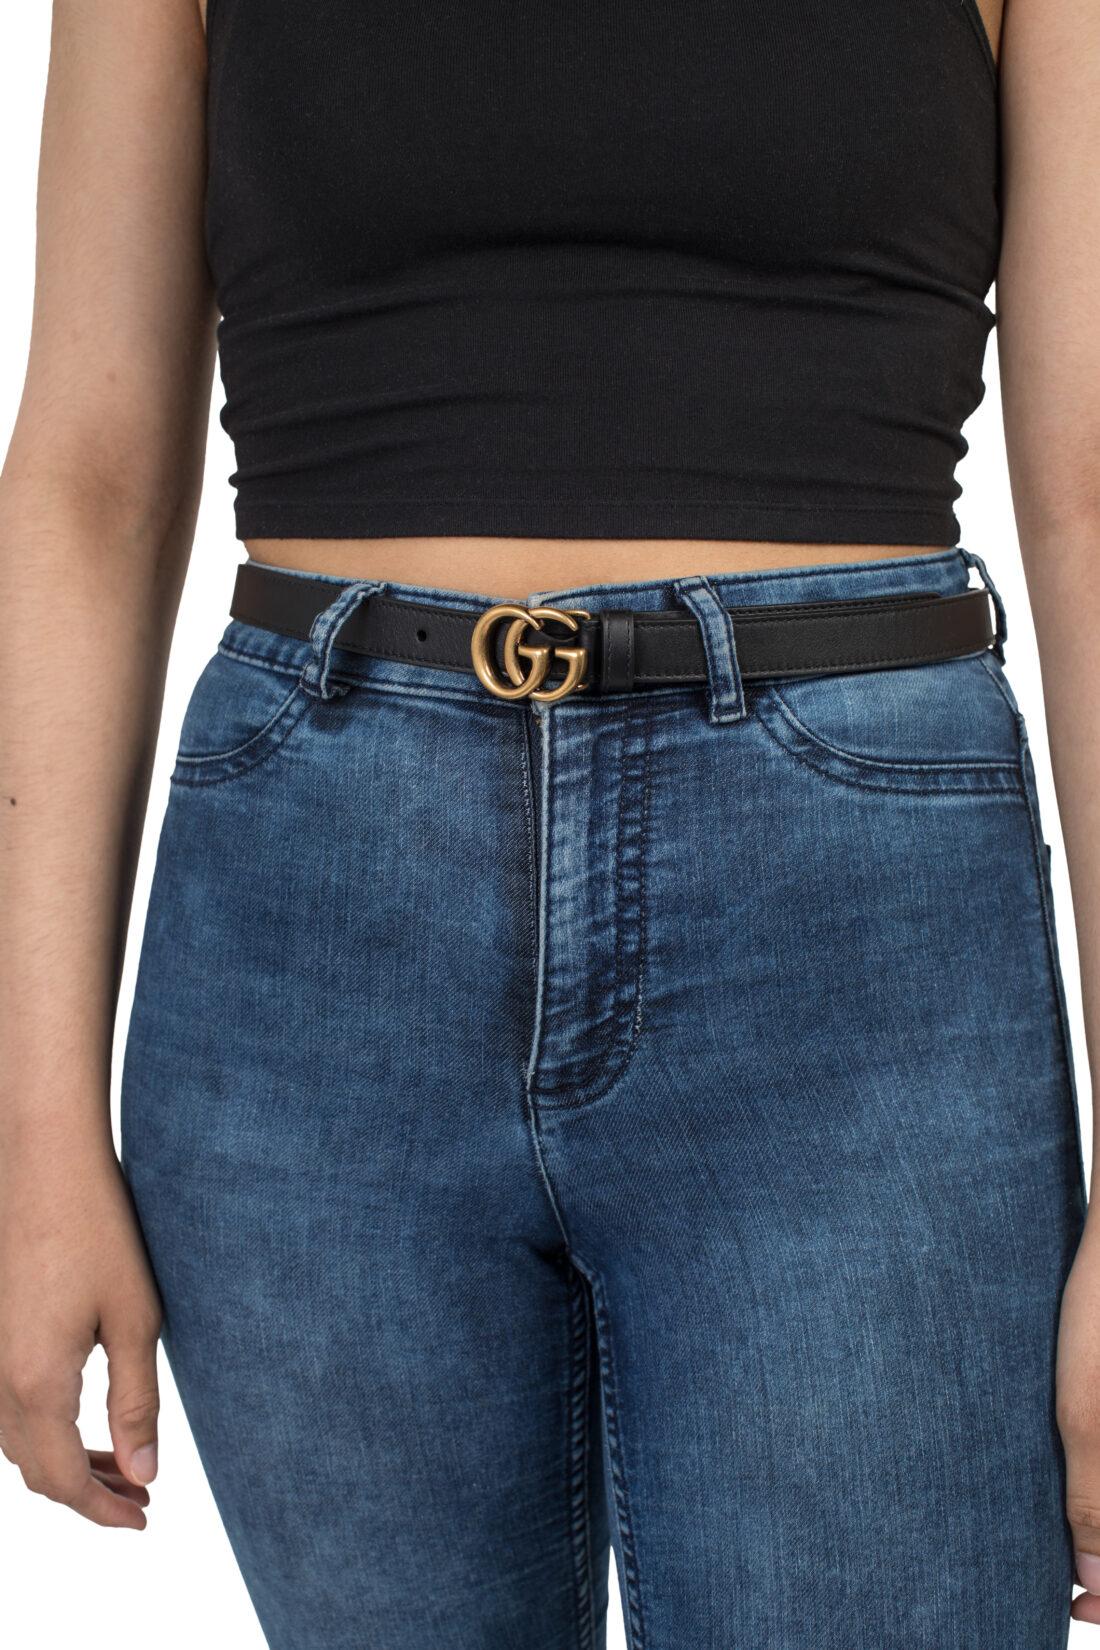 How Much Does a Gucci Belt Cost